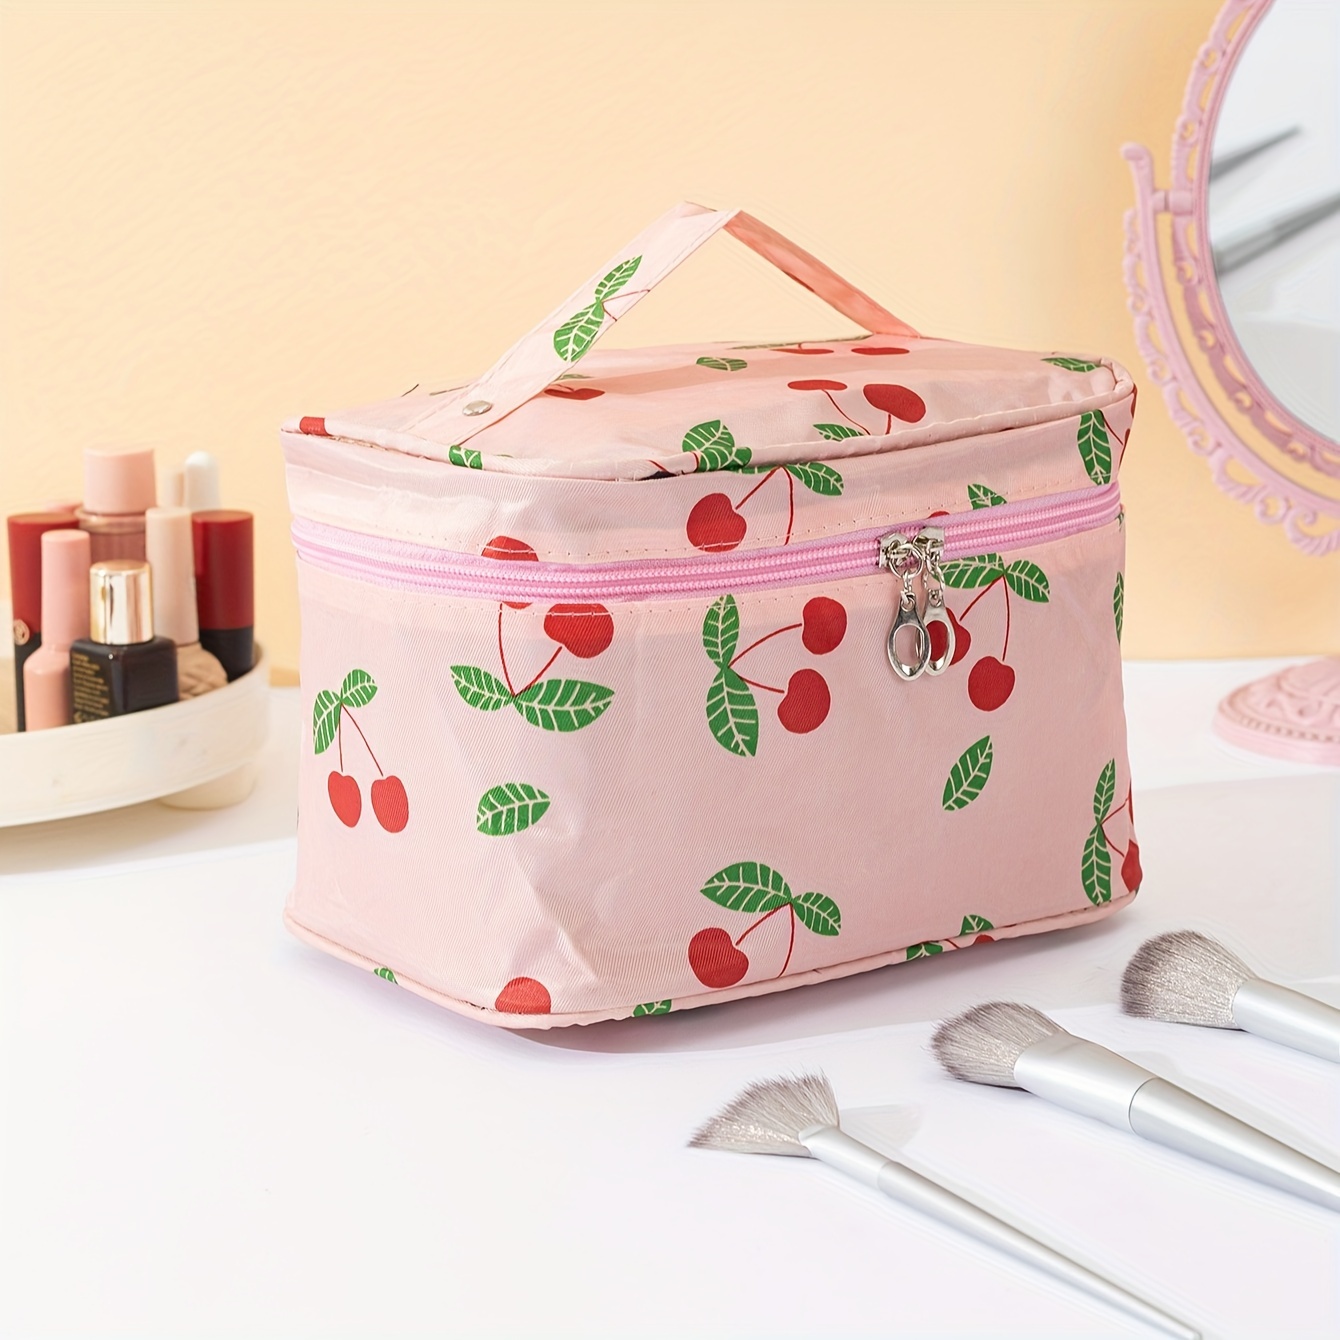  Zeyune 2 Pcs Cotton Quilted Makeup Bag Large Travel Coquette  Makeup Bag Aesthetic Cute Cherry Floral Bear Makeup Bag for Women Girls  (Floral Style) : Beauty & Personal Care